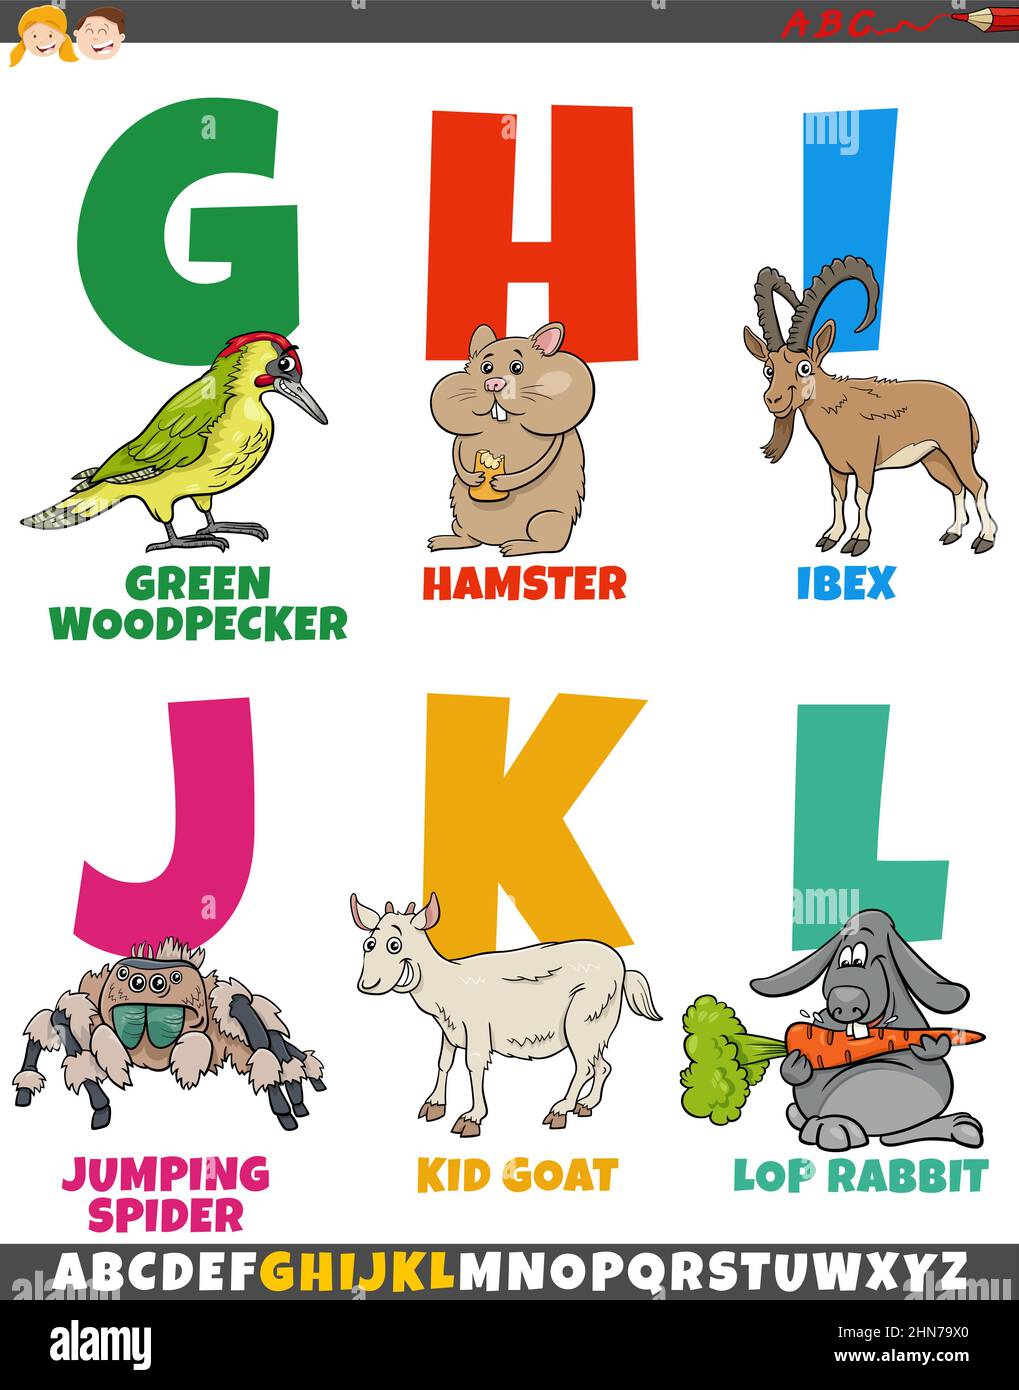 Cartoon illustration of educational colorful alphabet set from letter G to L with animal characters Stock Vector